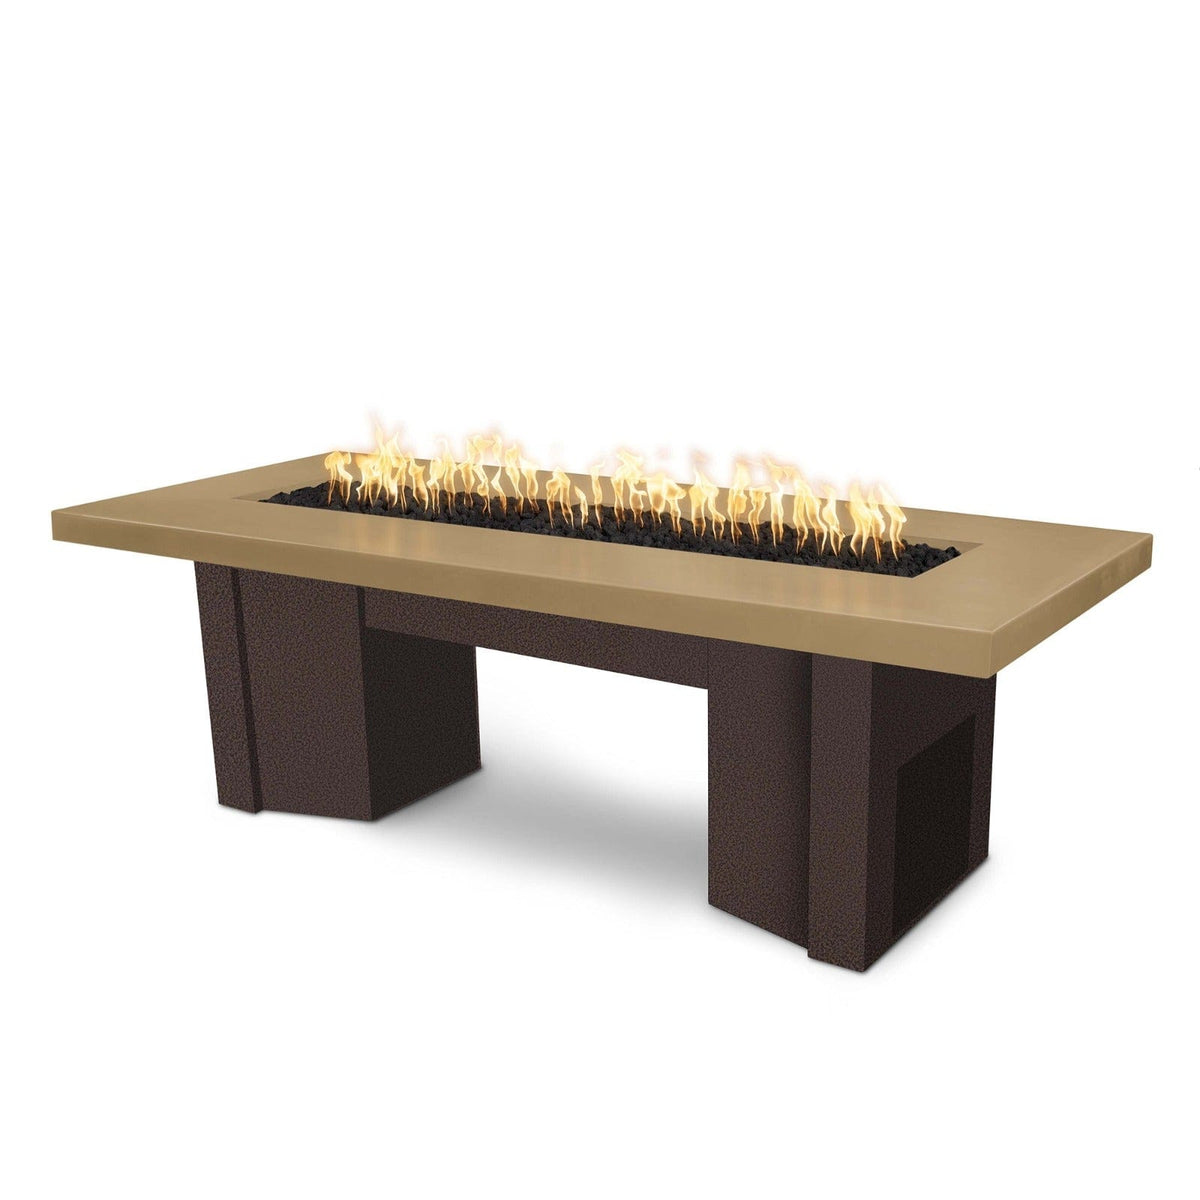 The Outdoor Plus Fire Features Brown (-BRN) / Copper Vein Powder Coated Steel (-CPV) The Outdoor Plus 60&quot; Alameda Fire Table Smooth Concrete in Liquid Propane - 12V Electronic Ignition / OPT-ALMGFRC60E12V-LP